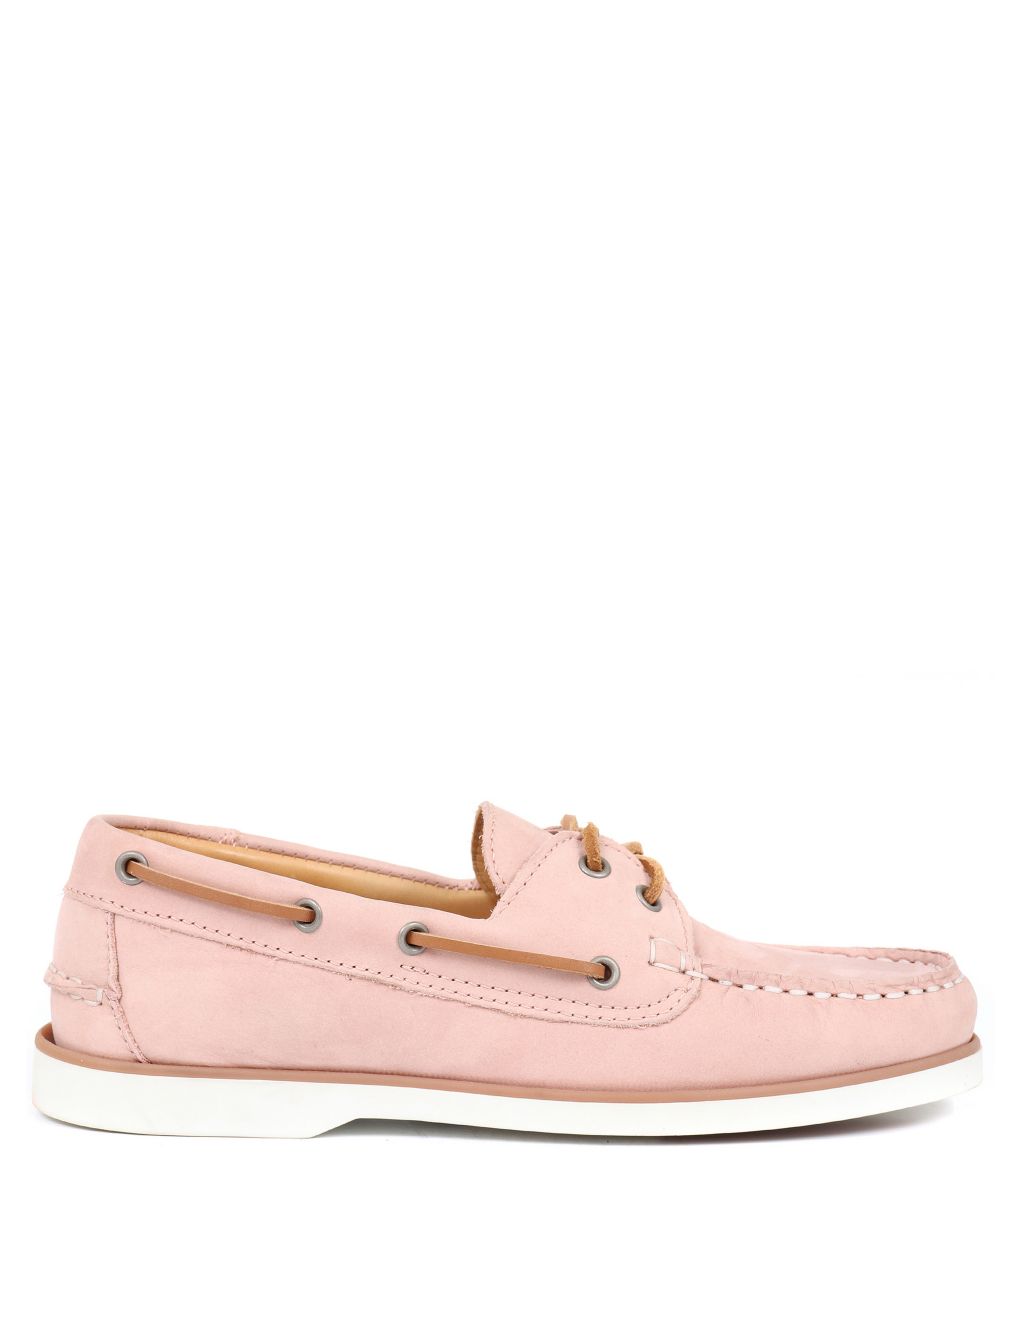 Leather Lace Up Slip On Boat Shoes image 1